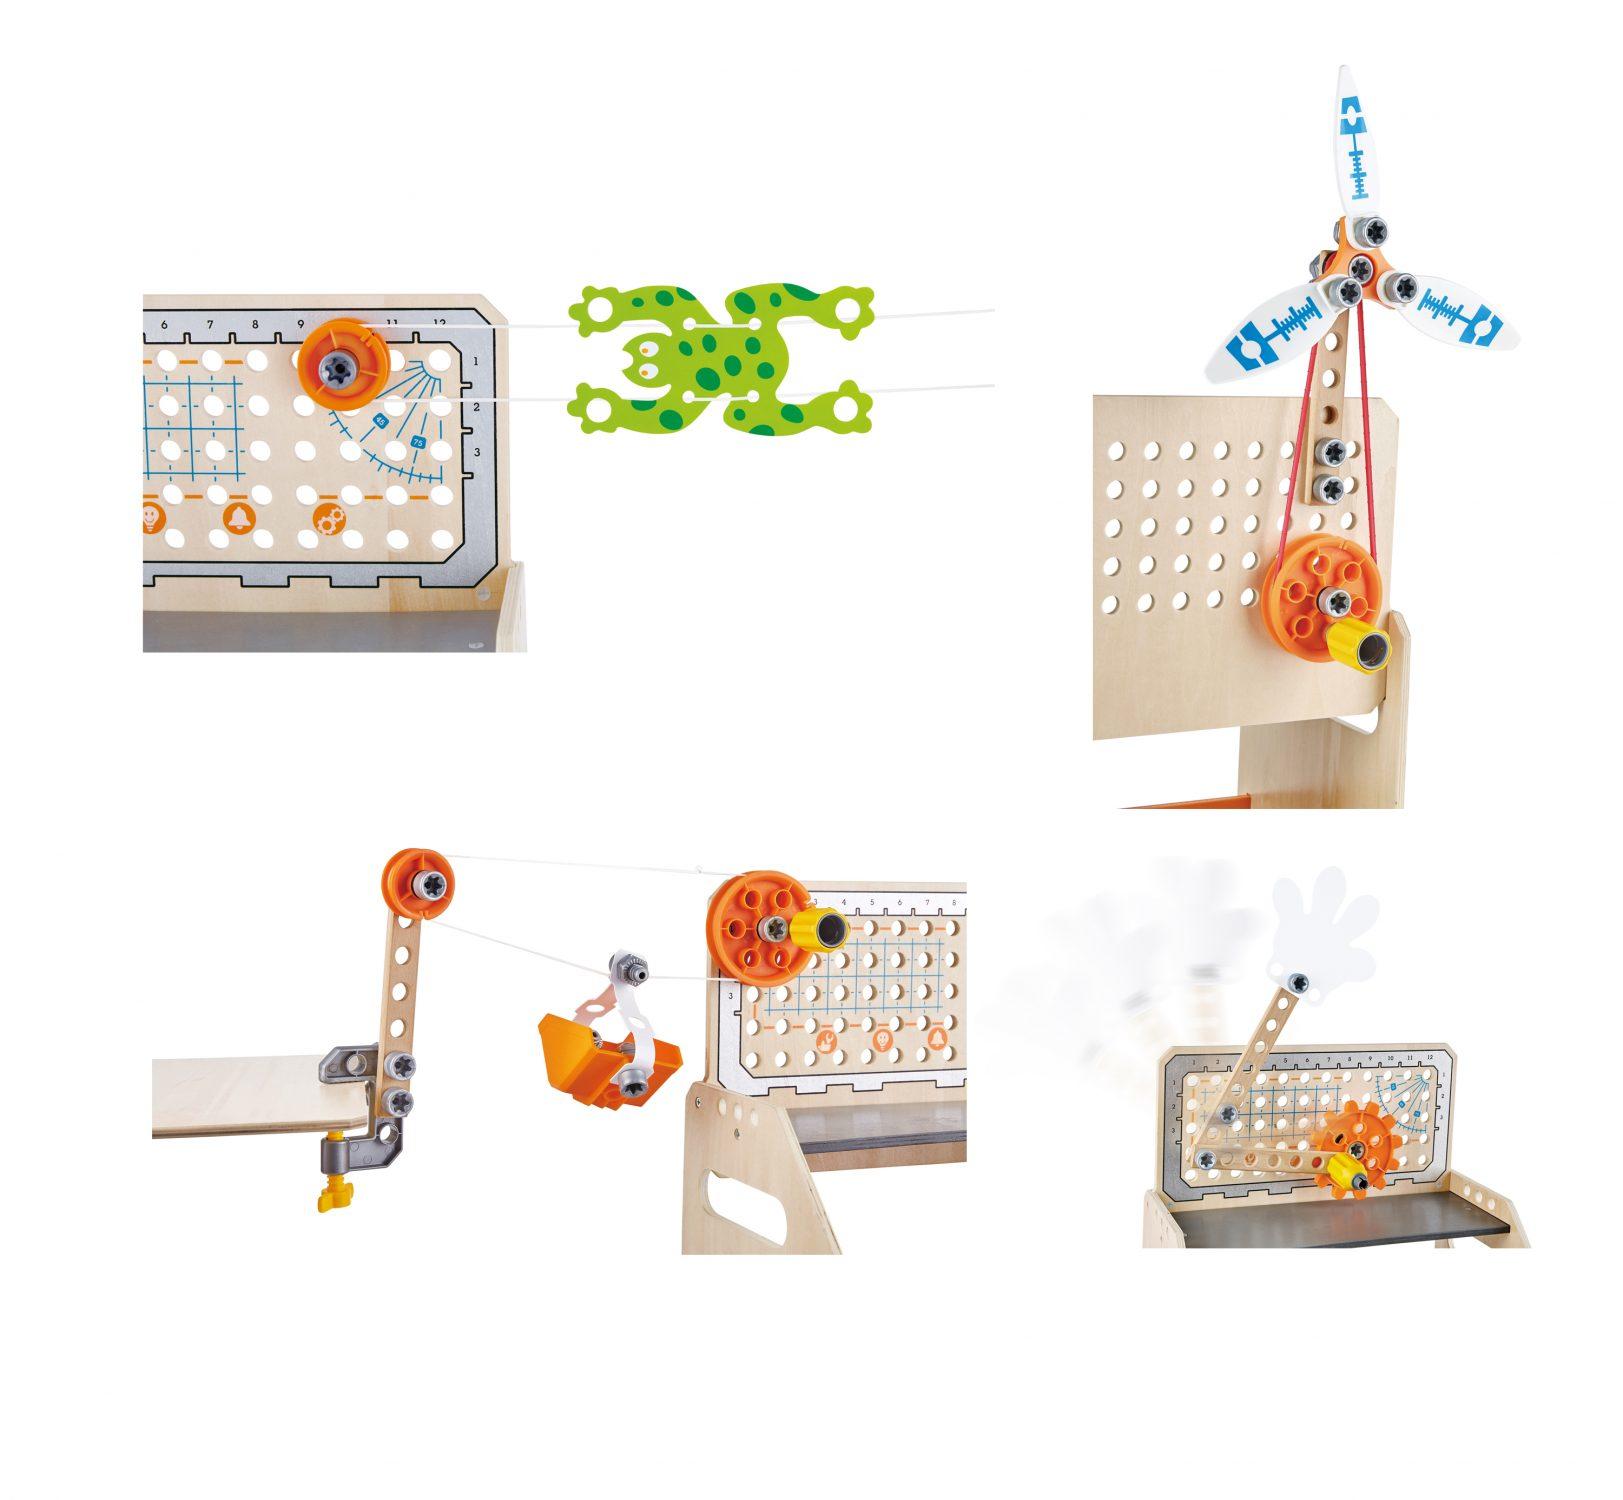 Wooden pieces that make up the experiments in the Hape Junior Inventor Discovery workbench.